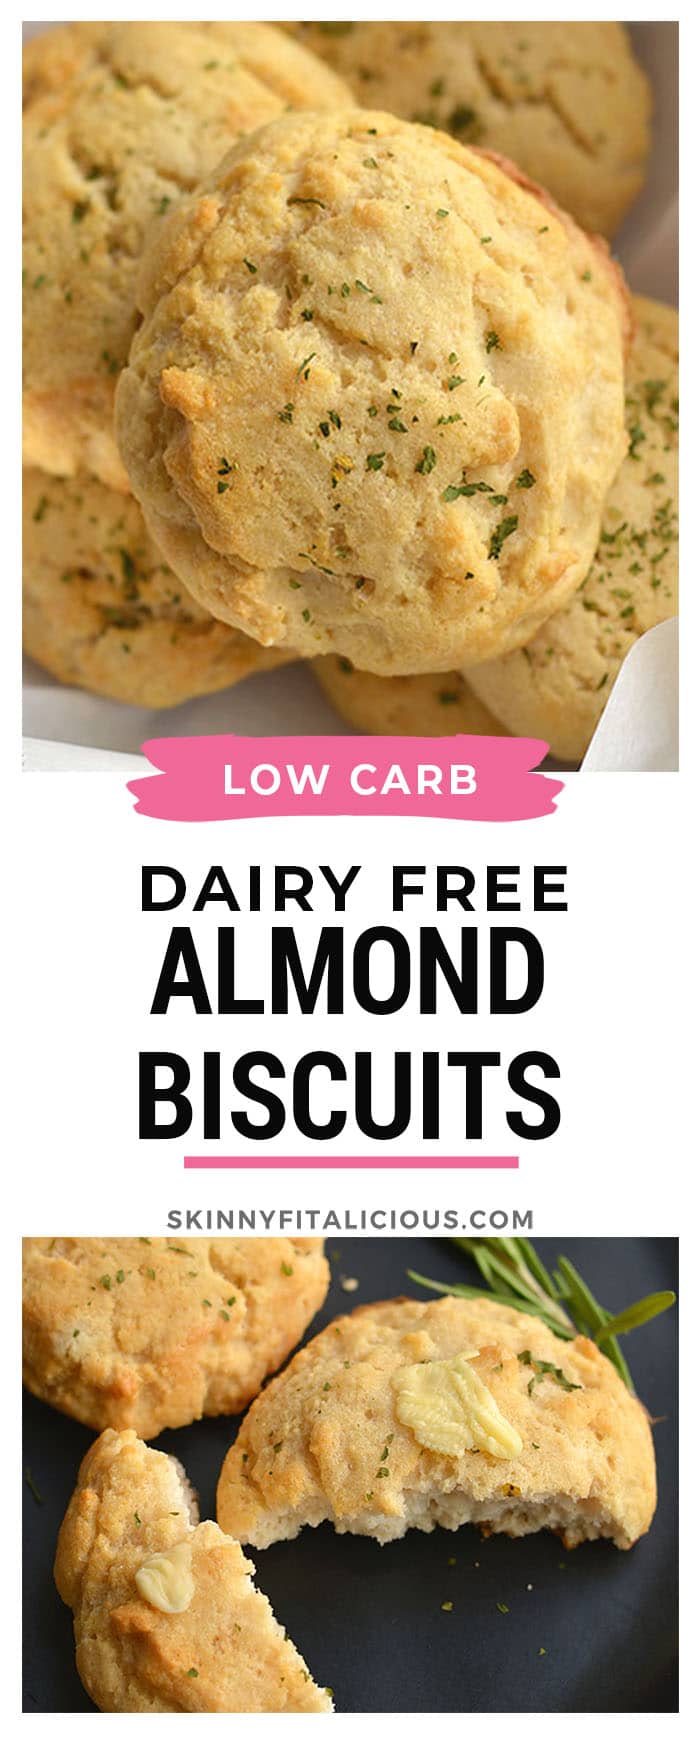 Healthy Almond Flour Biscuits! These gluten, yeast & diary free biscuits are quick to make, ready in 30 minutes and packed with healthy ingredients. Light, fluffy, EASY, delicious and crowd pleasing!